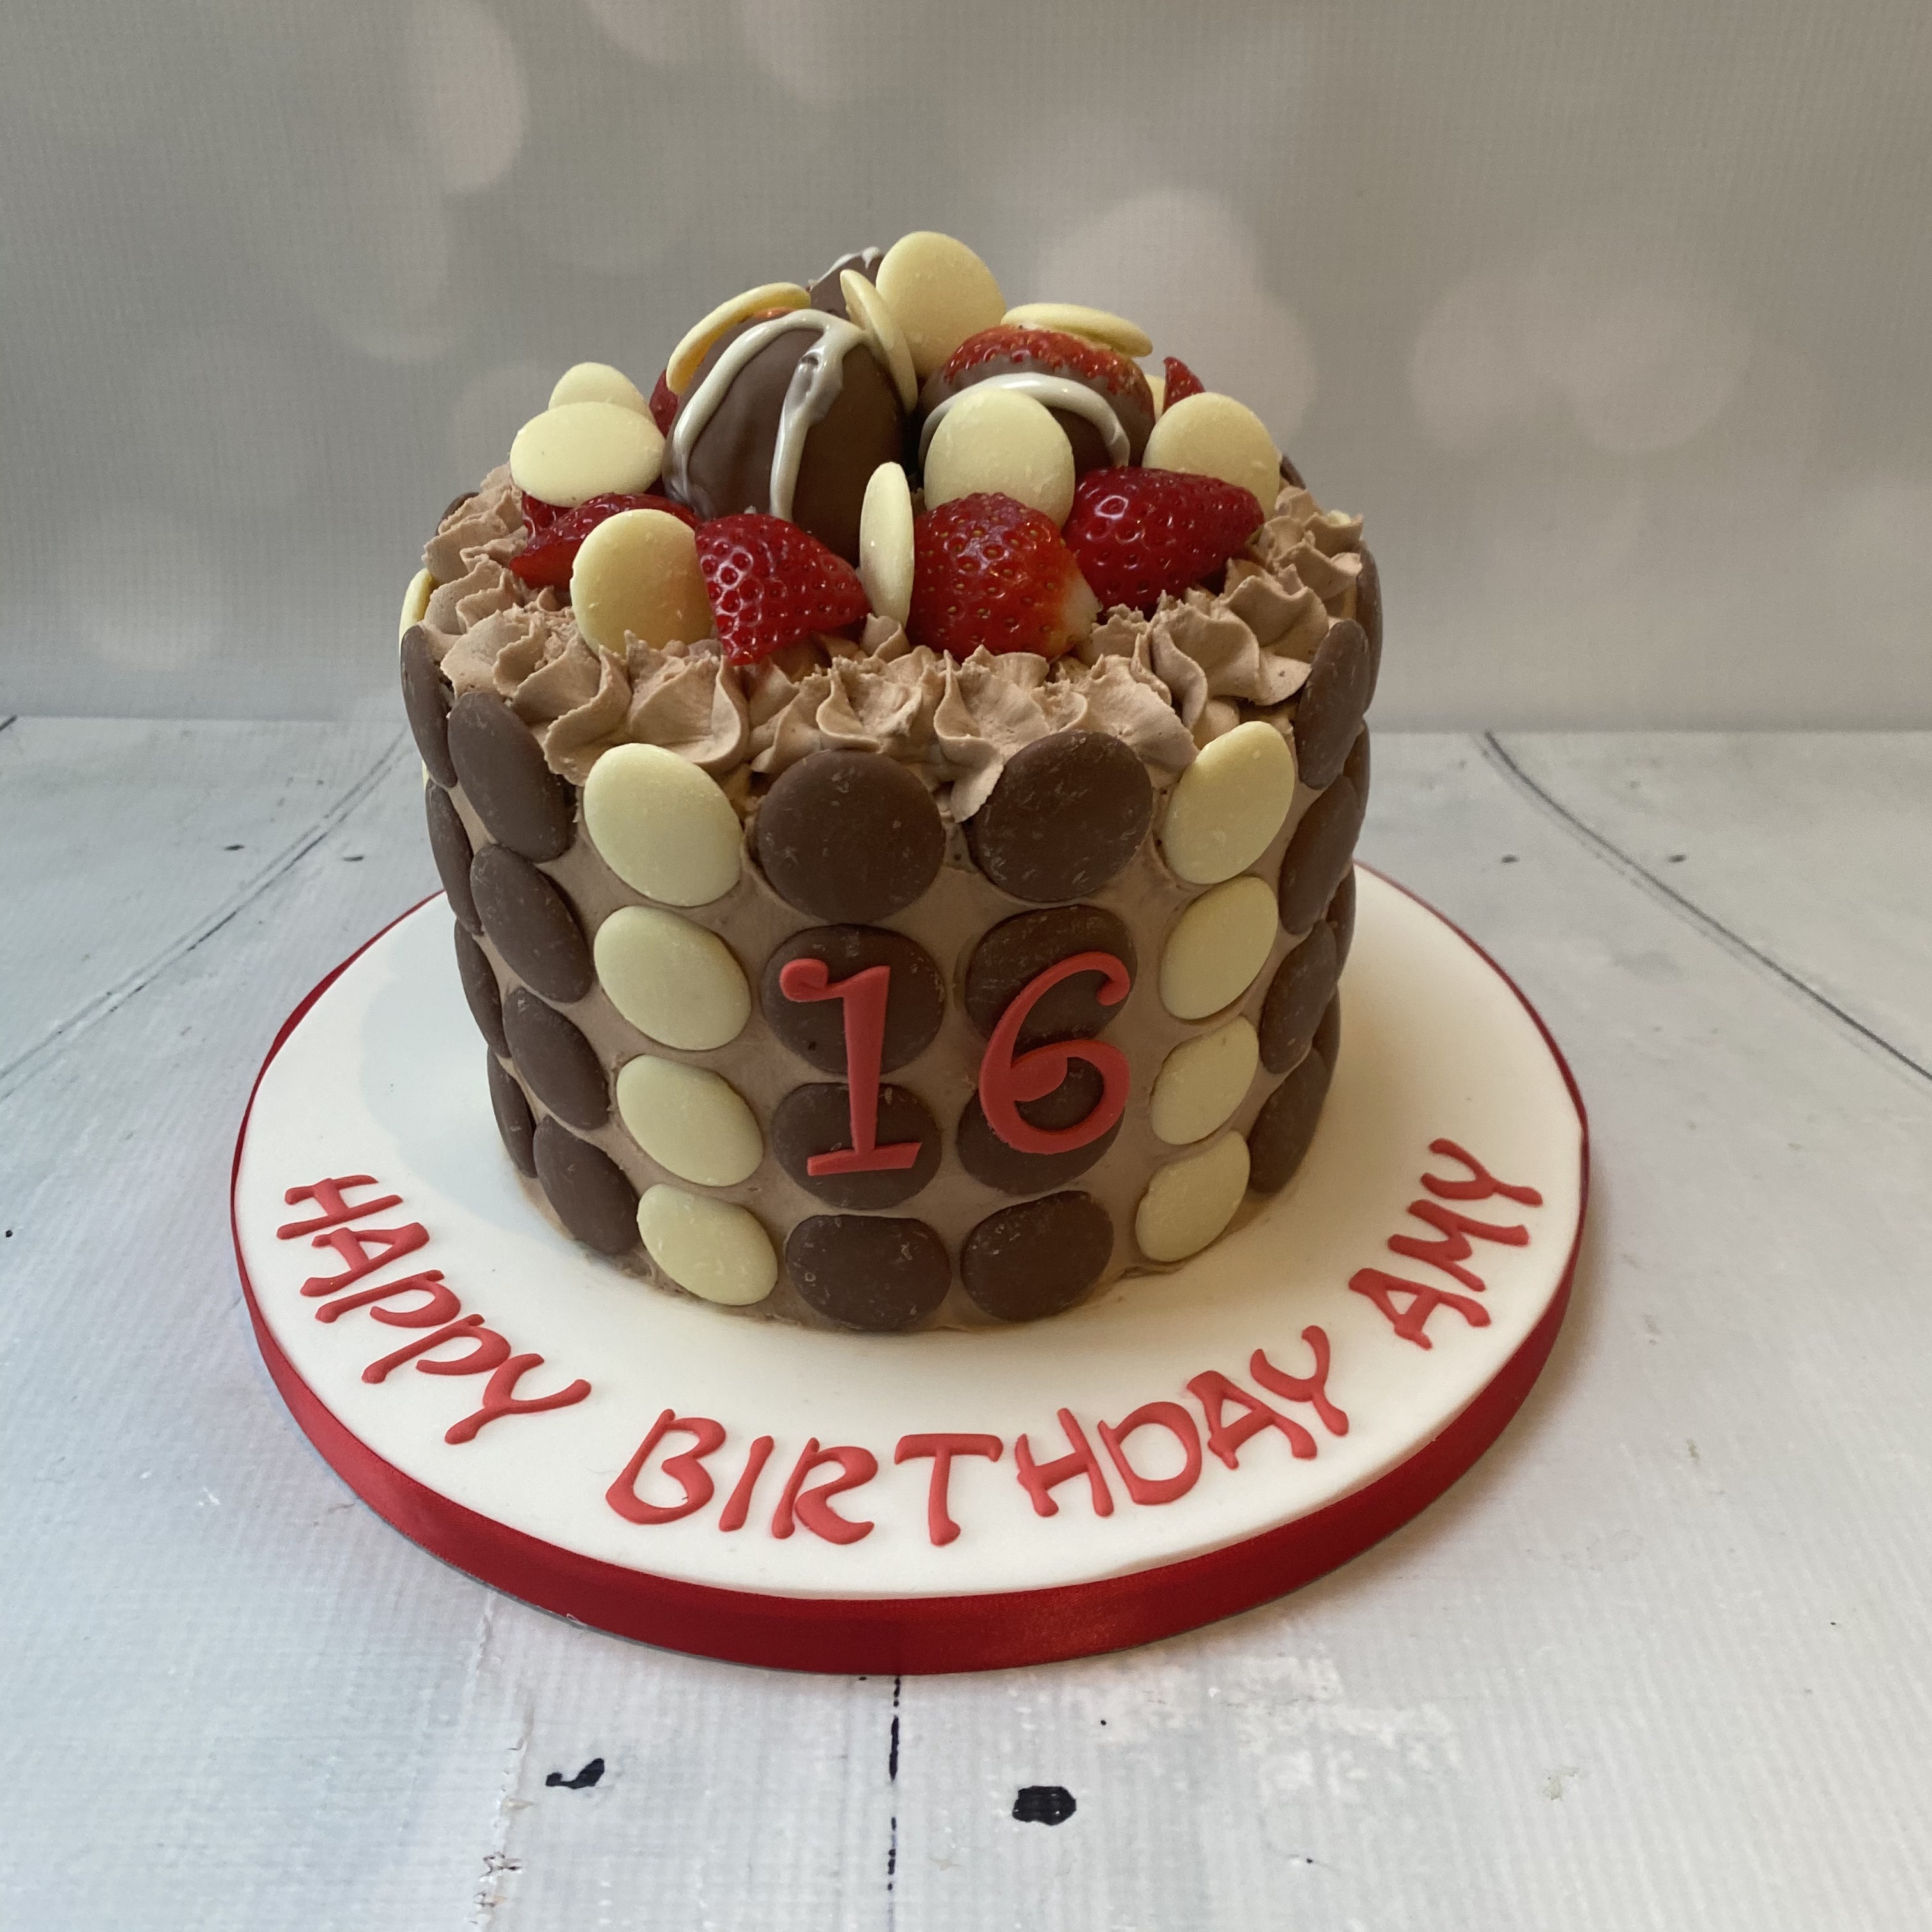 Chocolate buttons & strawberries cake